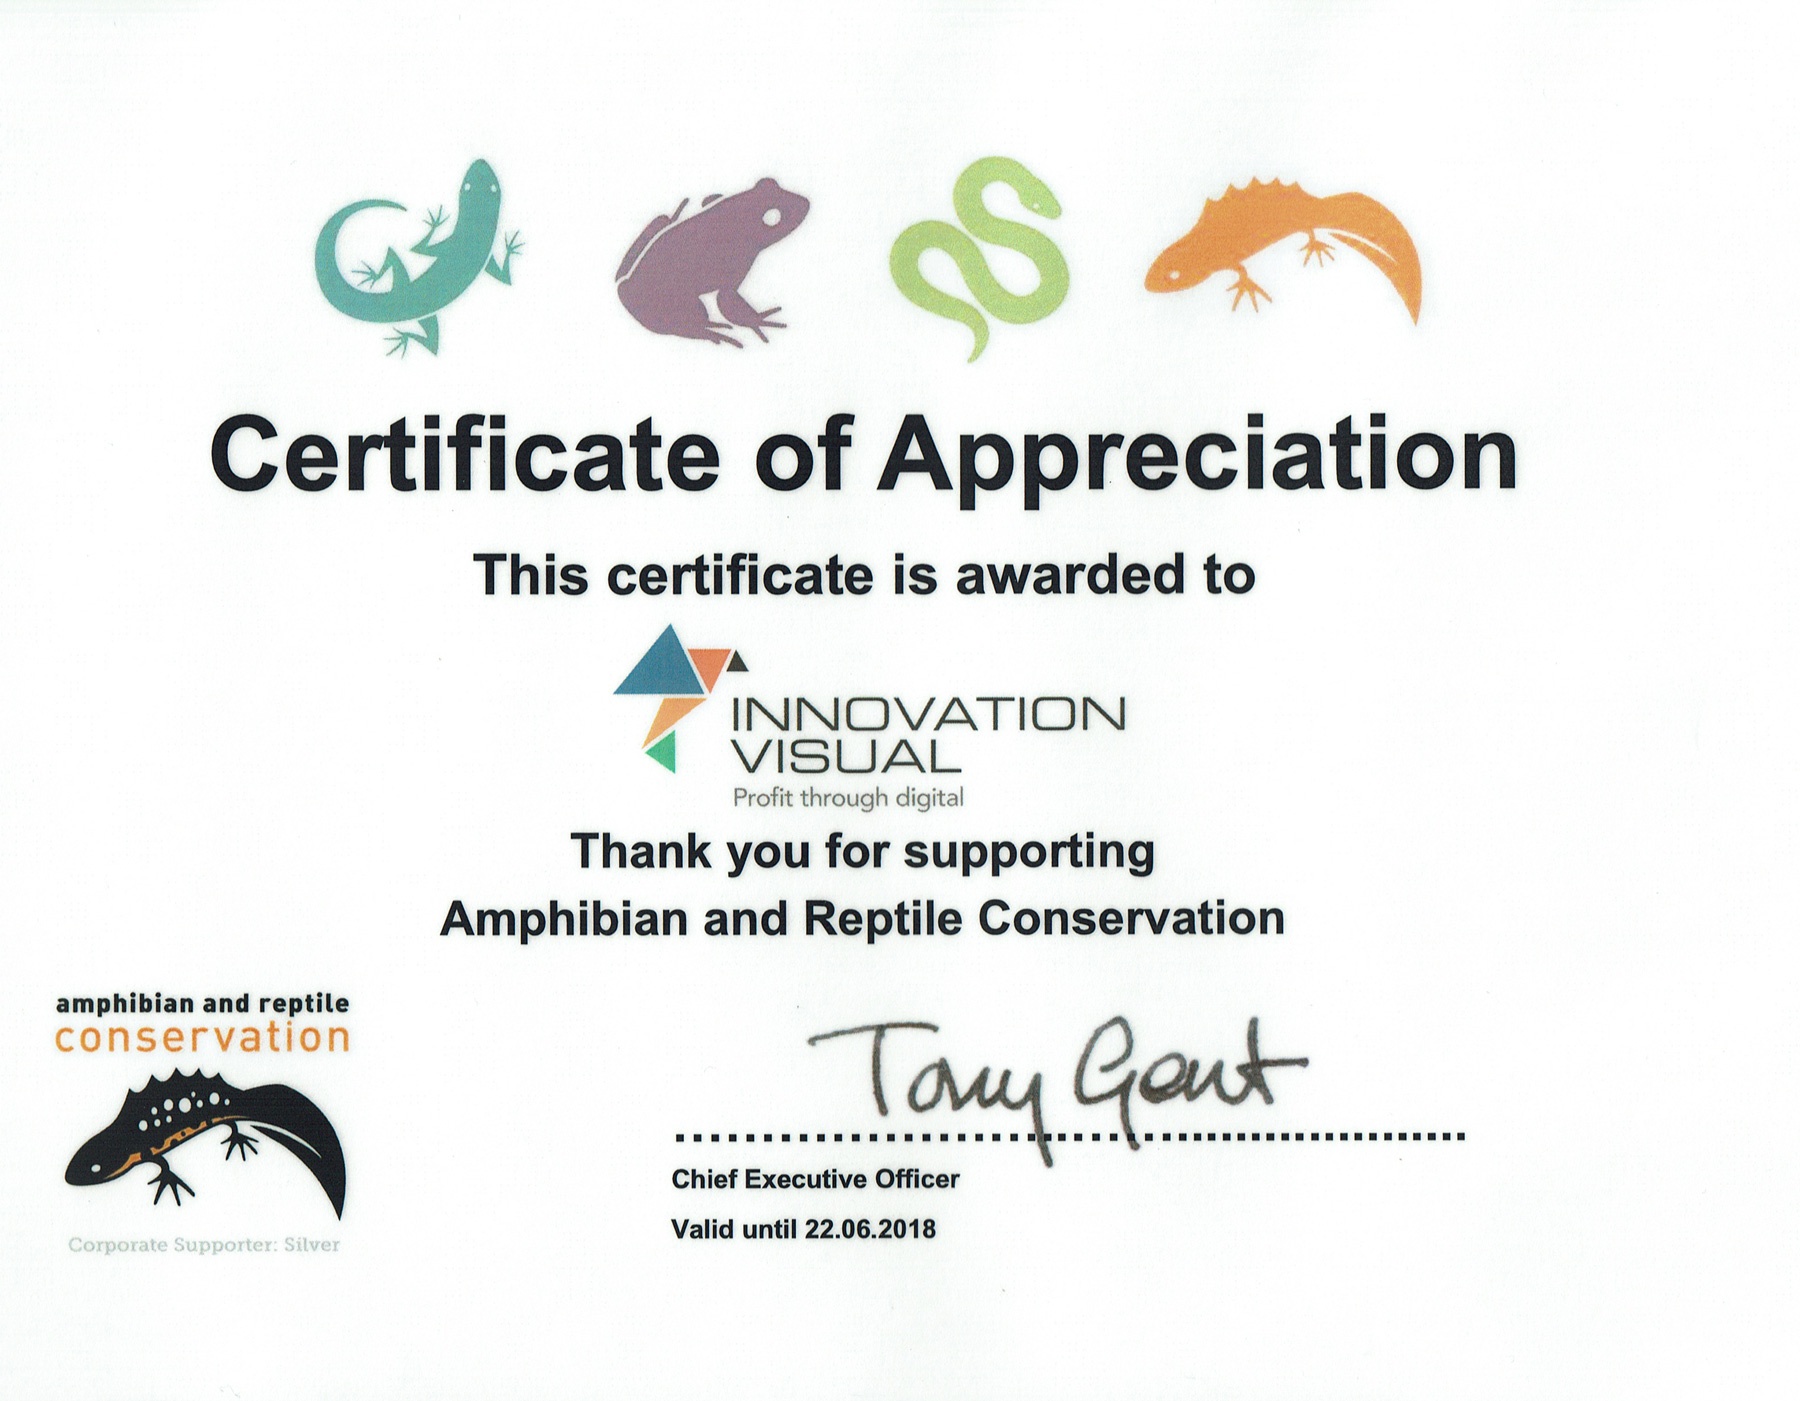 Amphibian and Reptile Conservation Trust Silver Supporters